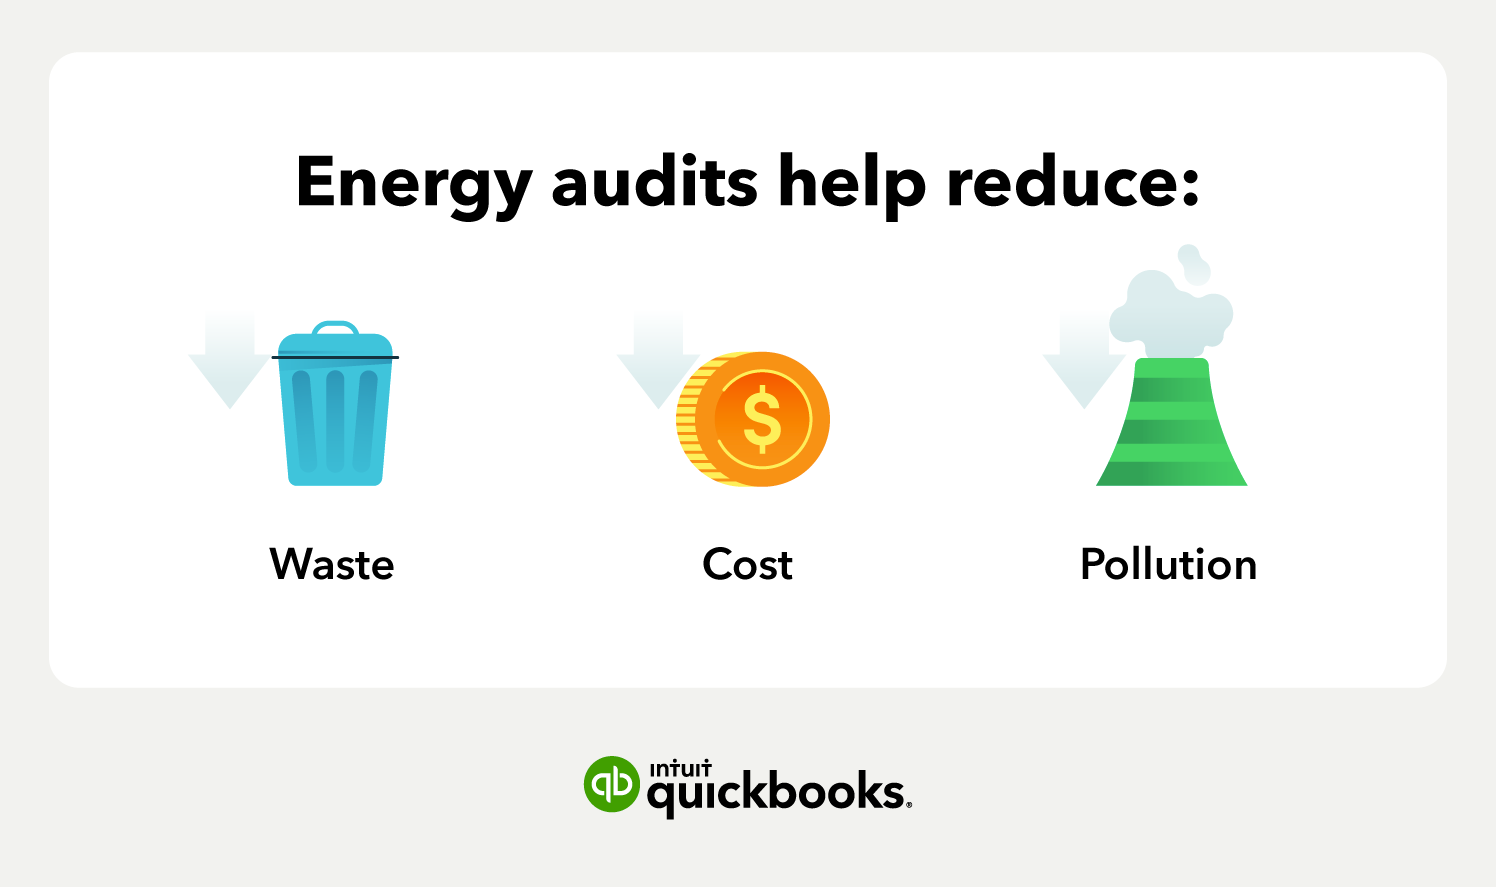 Why should I conduct an energy audit?